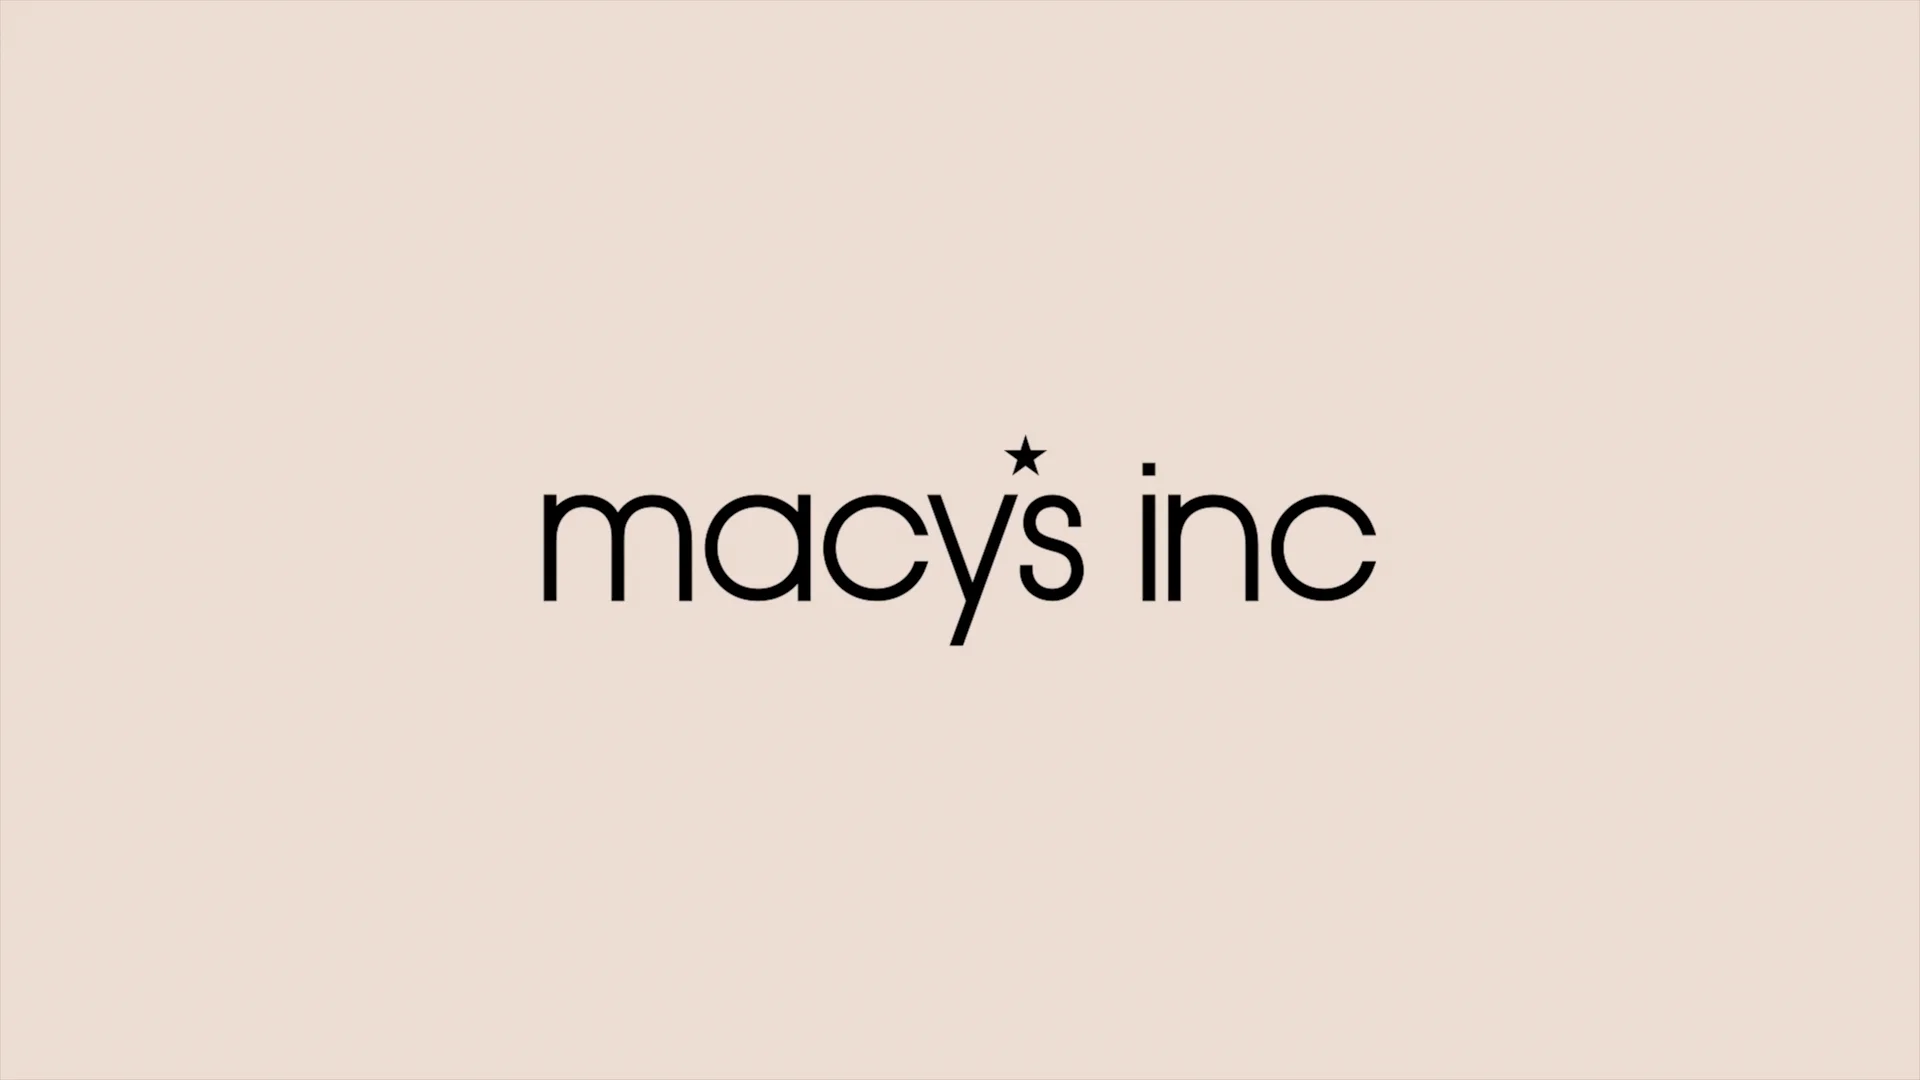 Macy's, Inc - Mission Every One with Spanish Subtitles - 3.1.22 on Vimeo